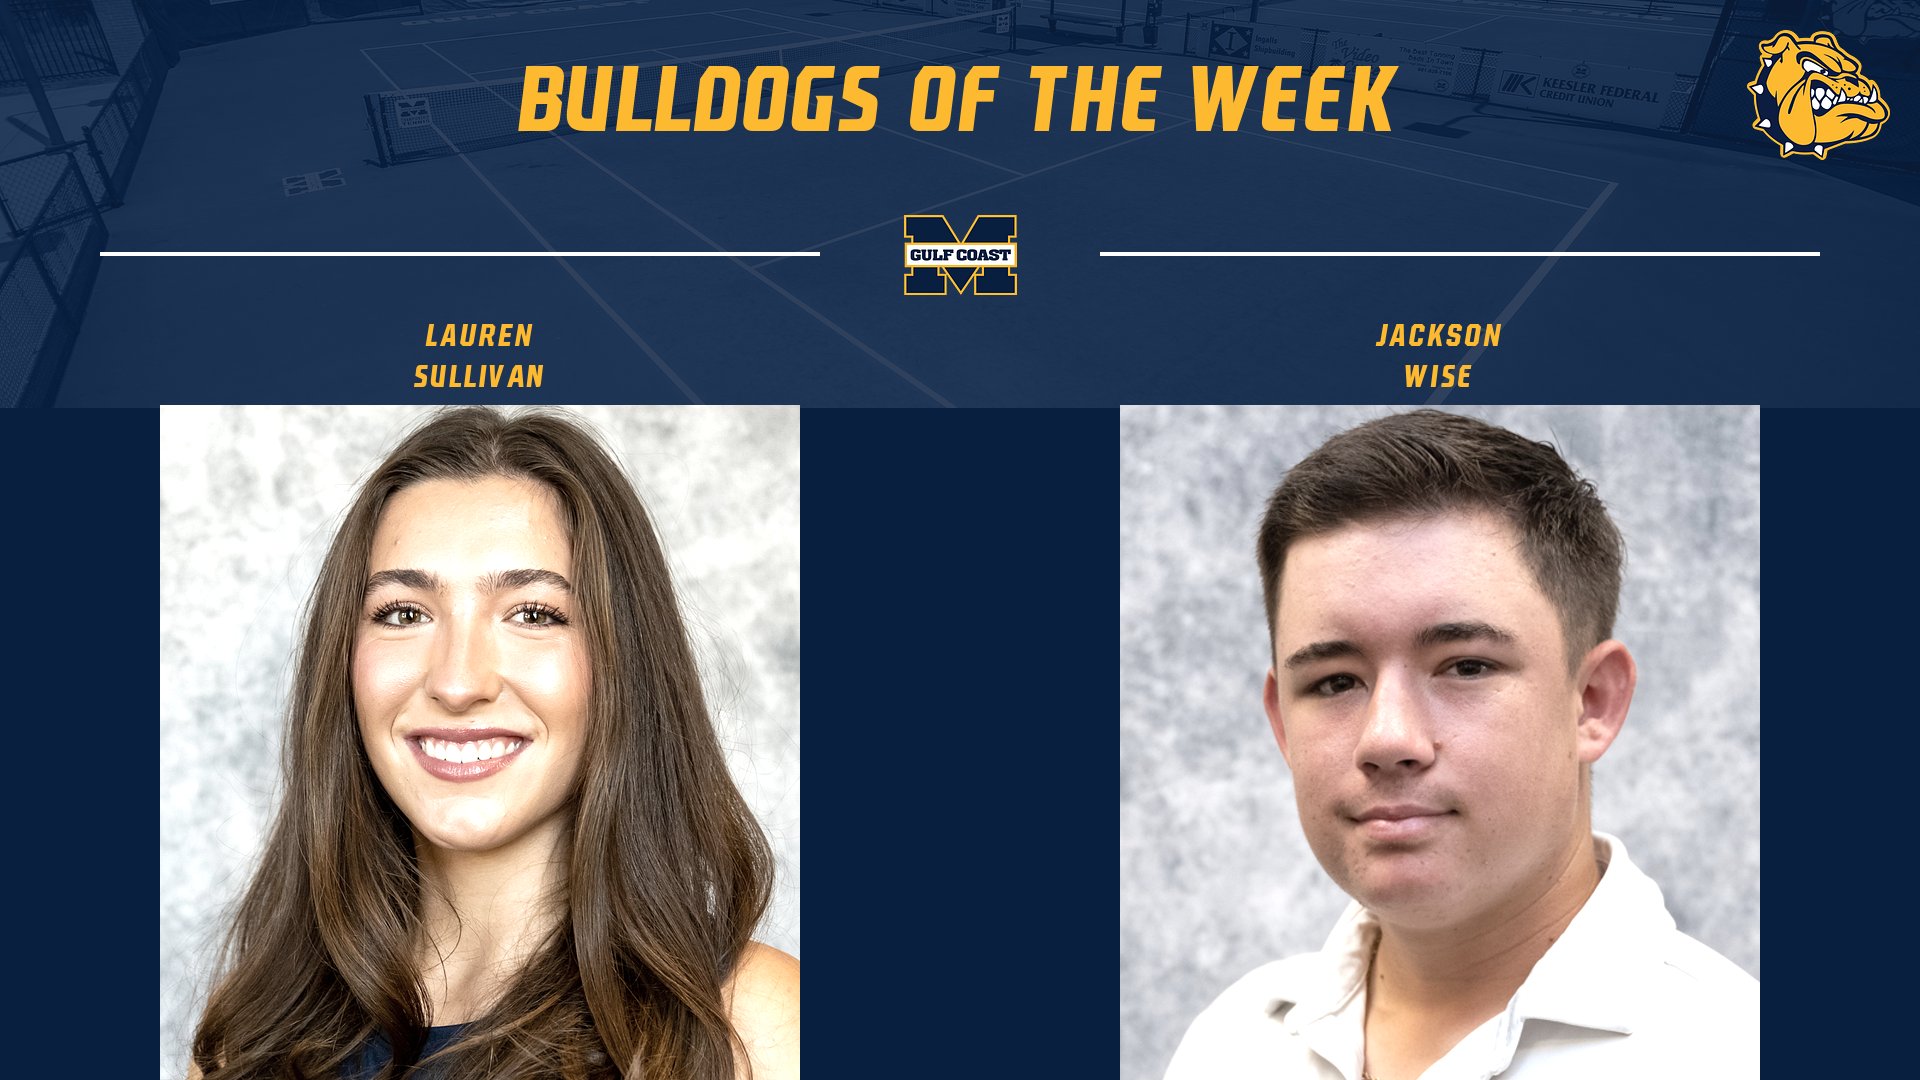 Sullivan, Wise named Bulldogs of the Week